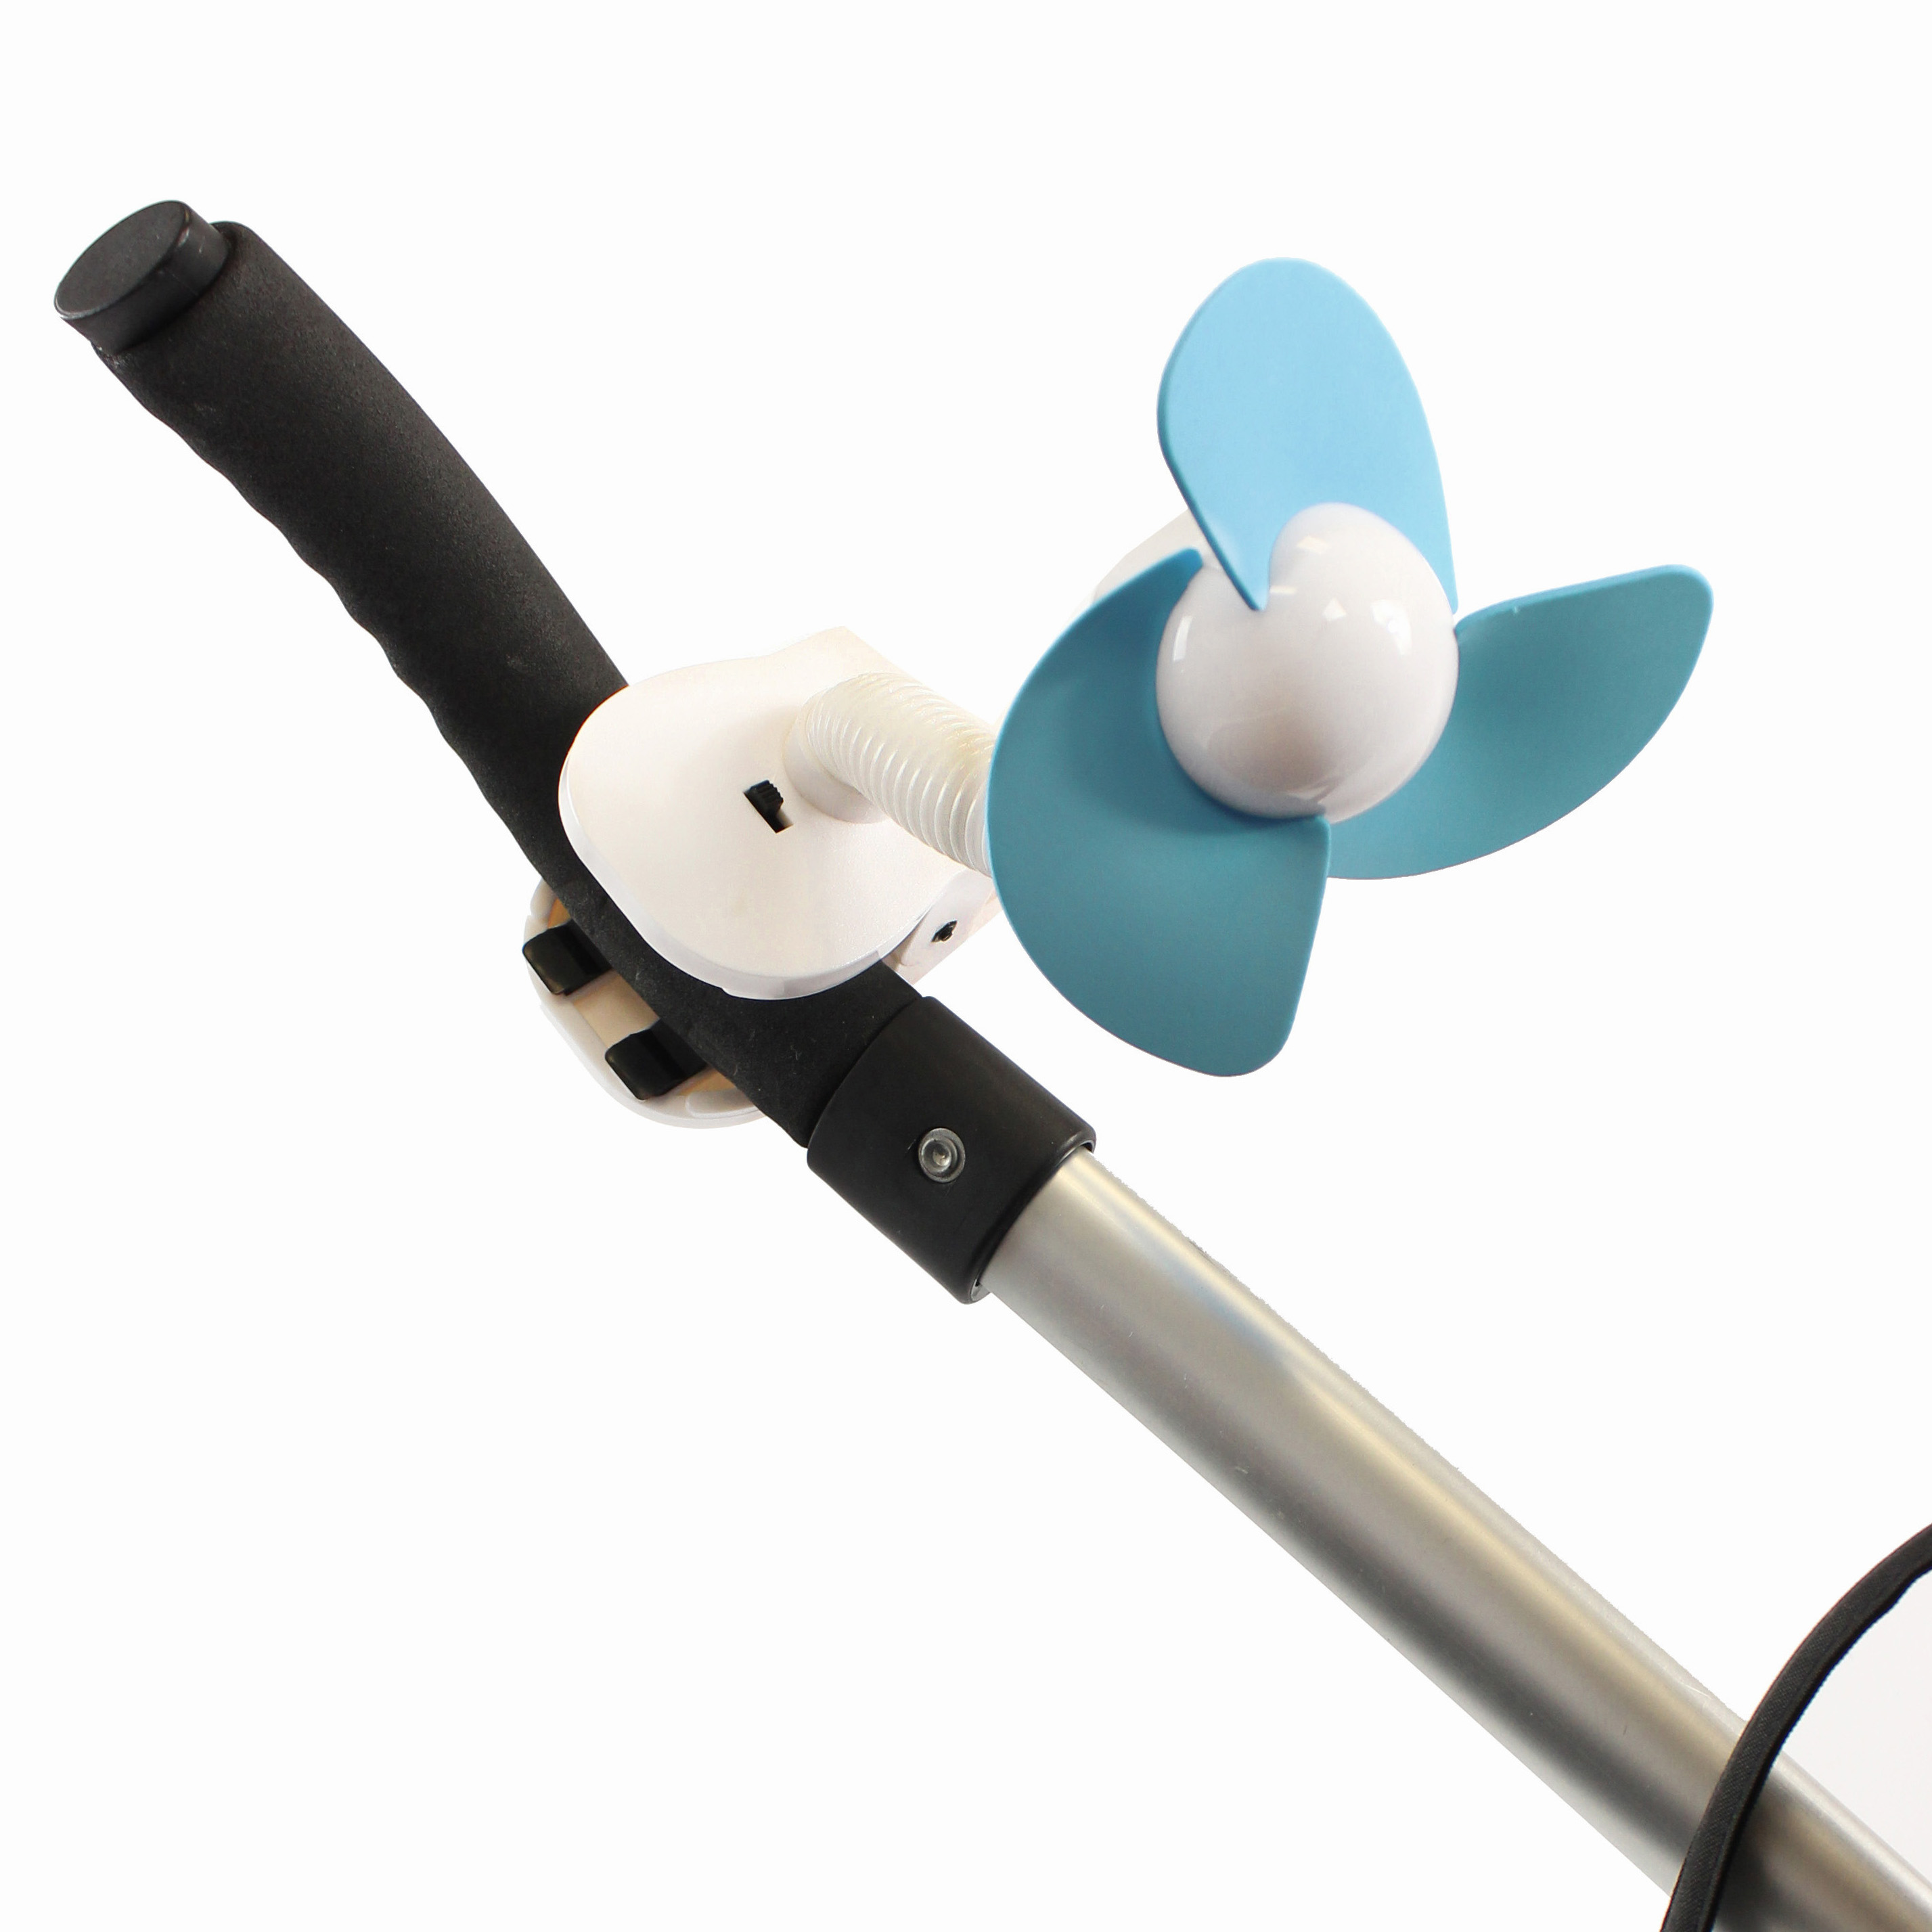 Dreambaby L230 Dreambaby Stroller Fan - Blue/White - Stroller Fan - Foam Fan - Attaches Easy - Great for On the Go Mom - Can be Used for Strollers - Cribs - In the Car and More - image 5 of 11